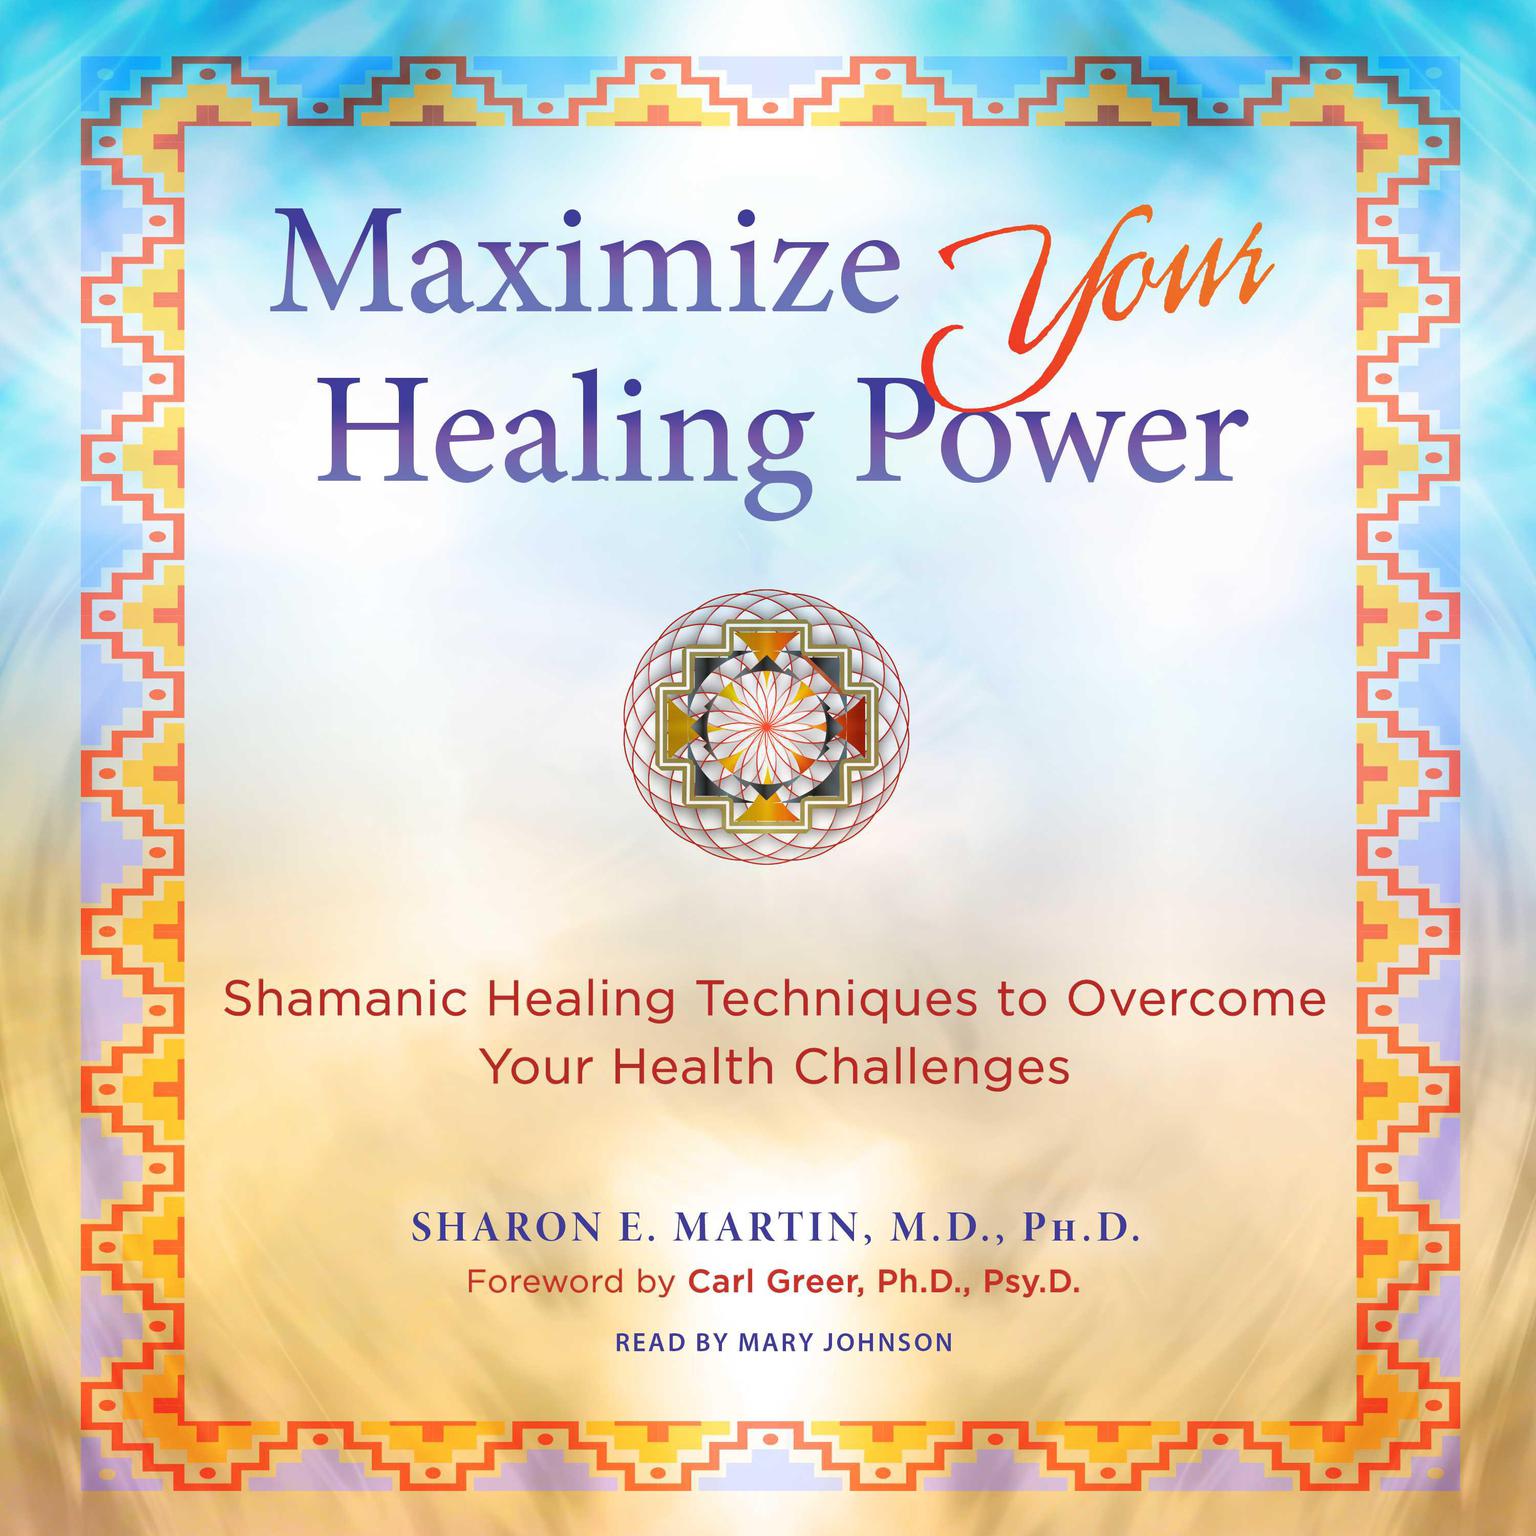 Maximize Your Healing Power: Shamanic Healing Techniques to Overcome Your Health Challenges Audiobook, by Sharon E. Martin